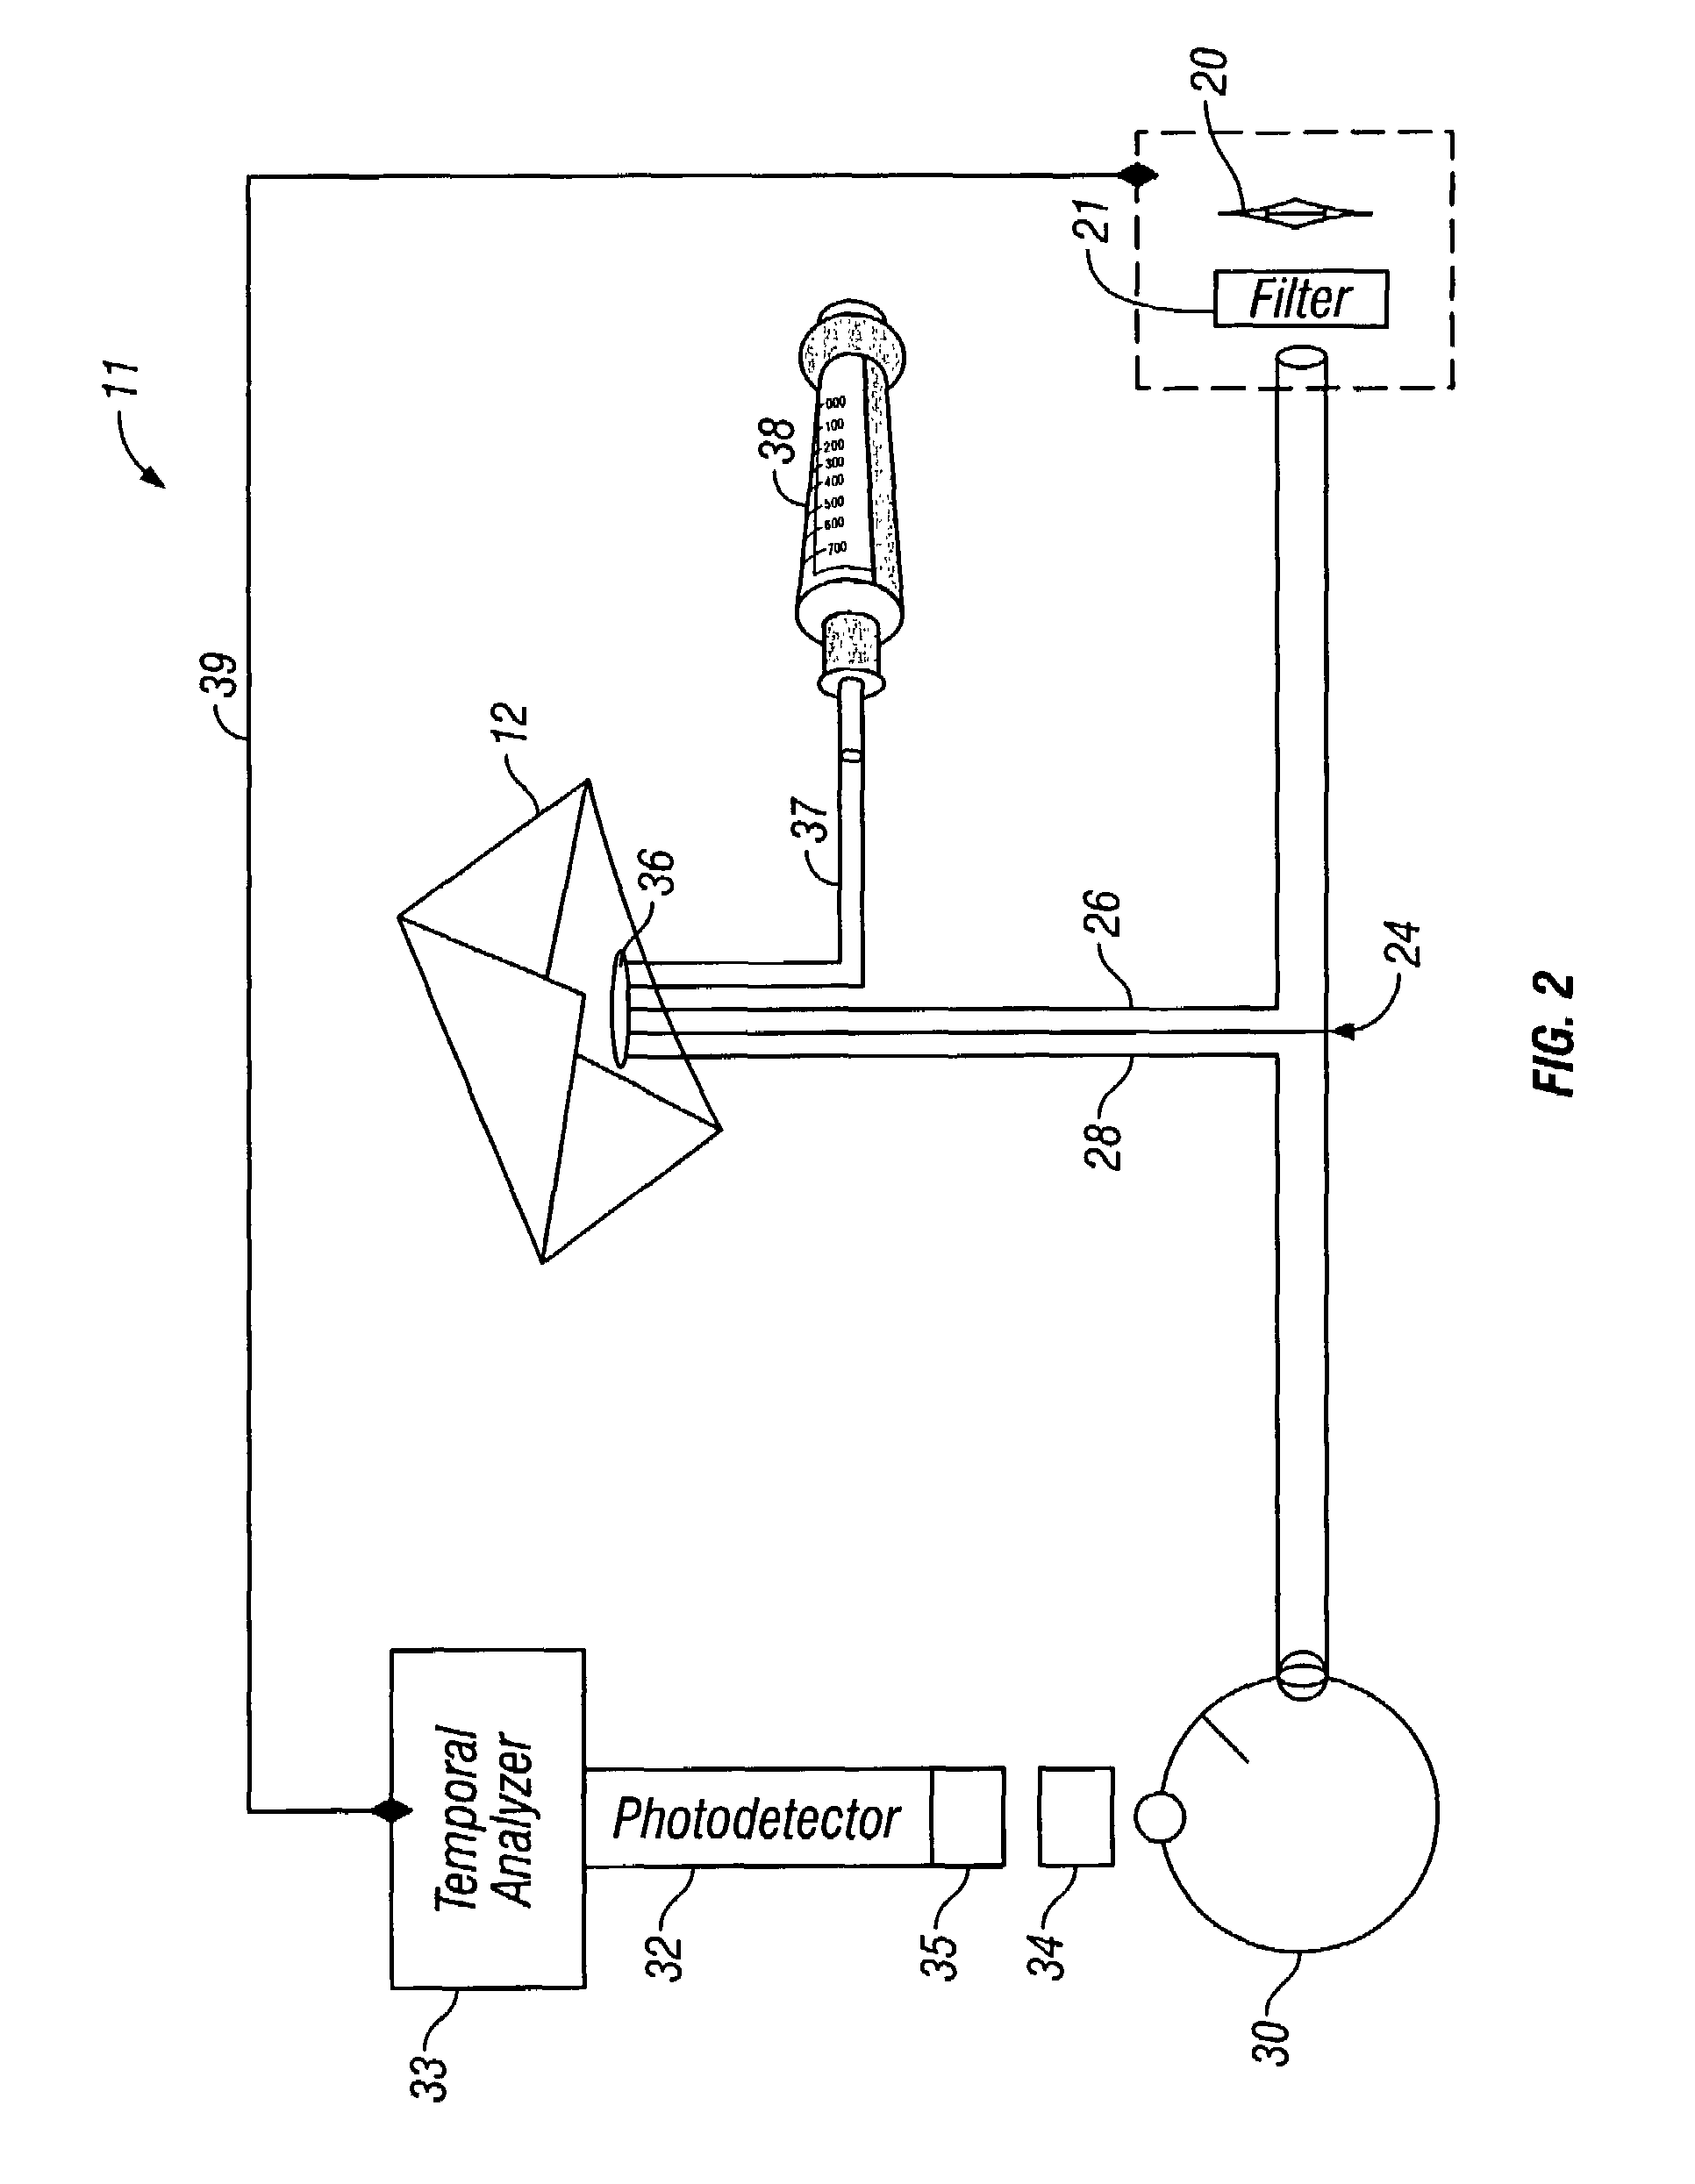 Method for detecting bacterial endospores in a sealed container